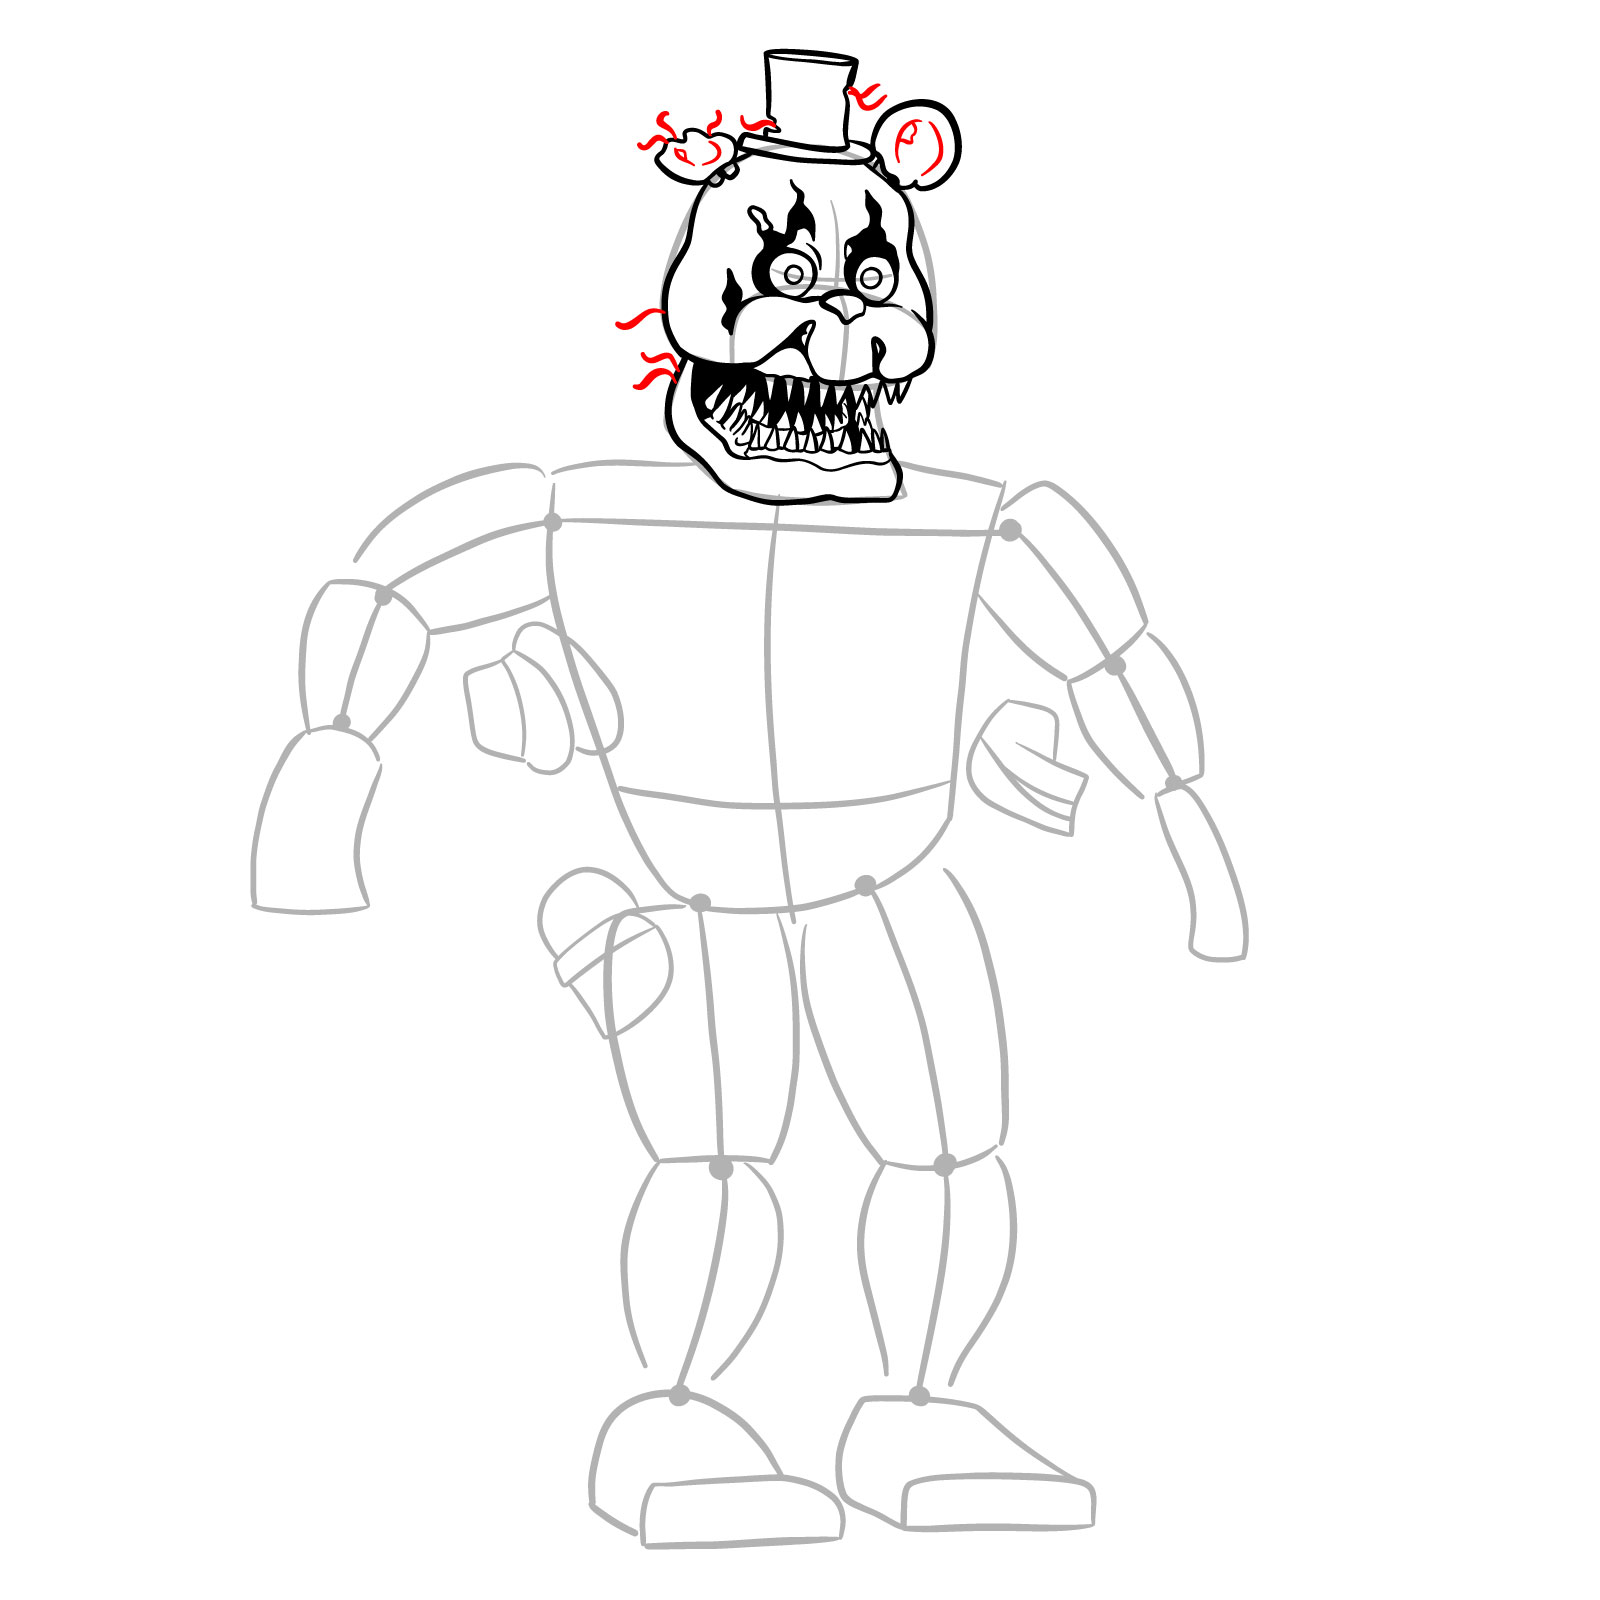 How to draw Nightmare Freddy - step 16